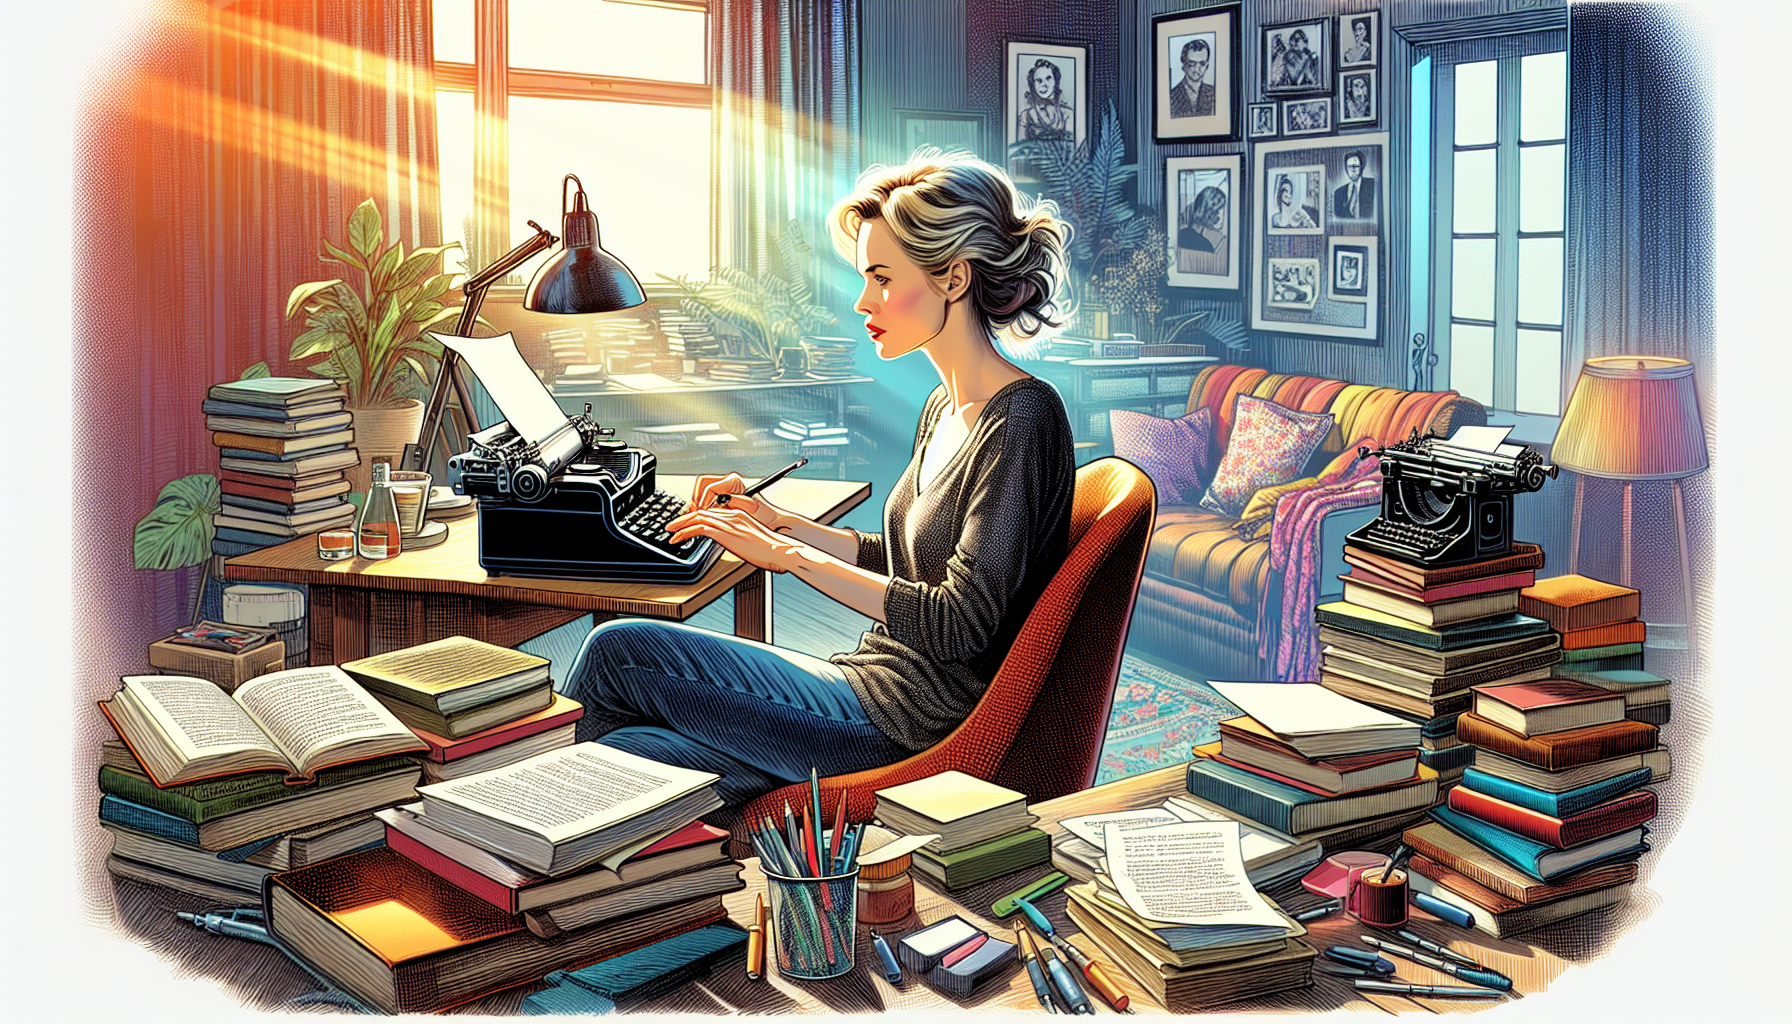 Portrait of a female screenwriter, Julie Bush, brainstorming in a cozy, sunlit study filled with books and screenplay drafts, with a vintage typewriter and a modern laptop on her desk.